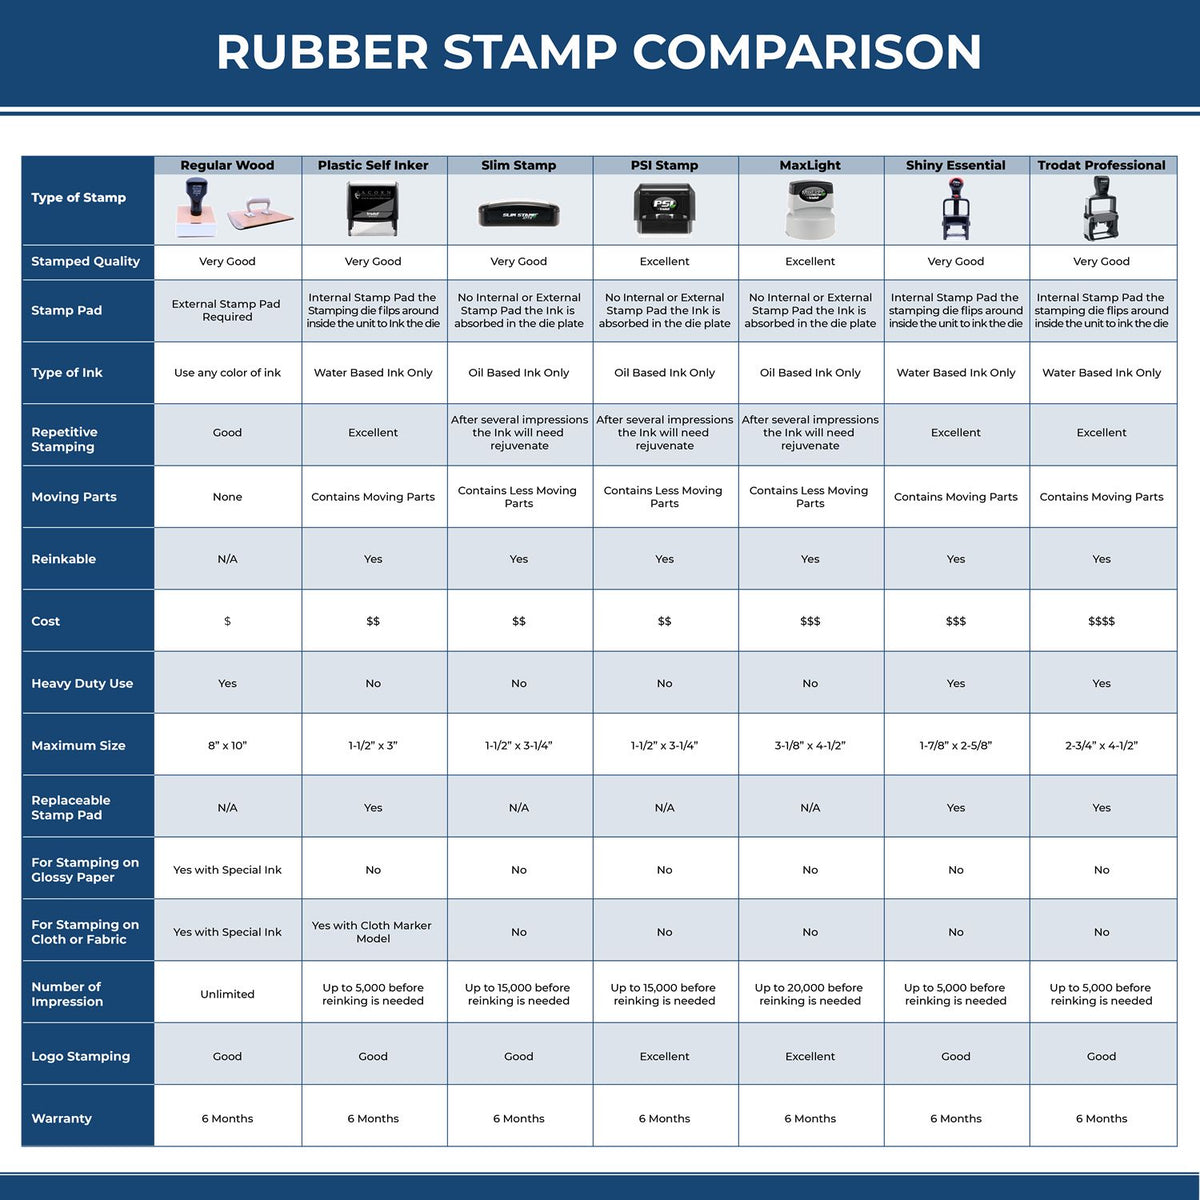 Large Self Inking Personal Stamp 4142S Rubber Stamp Comparison